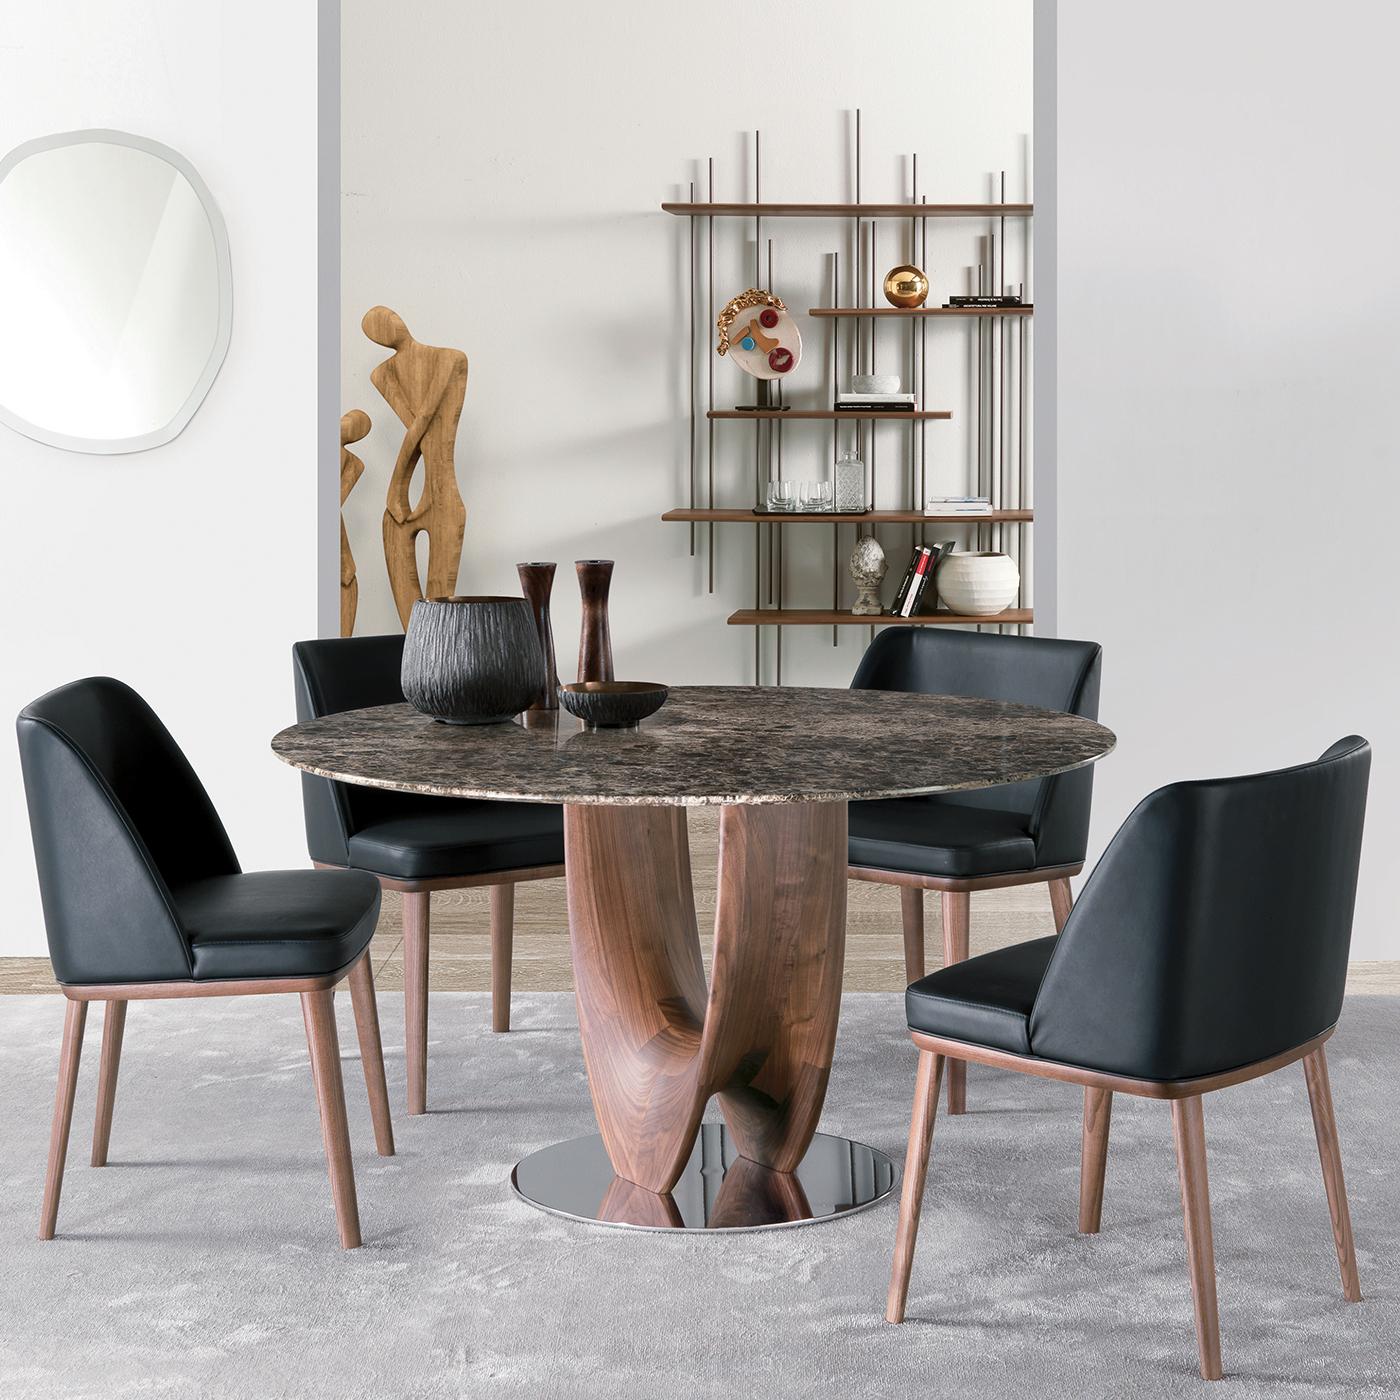 Part of the Axis collection designed by Stefano Bigi, this dinner table combines a round base in metal with a chrome plate and a round dark emperador marble top that effortlessly mixes Classic and modern allure. The standout feature of this table is